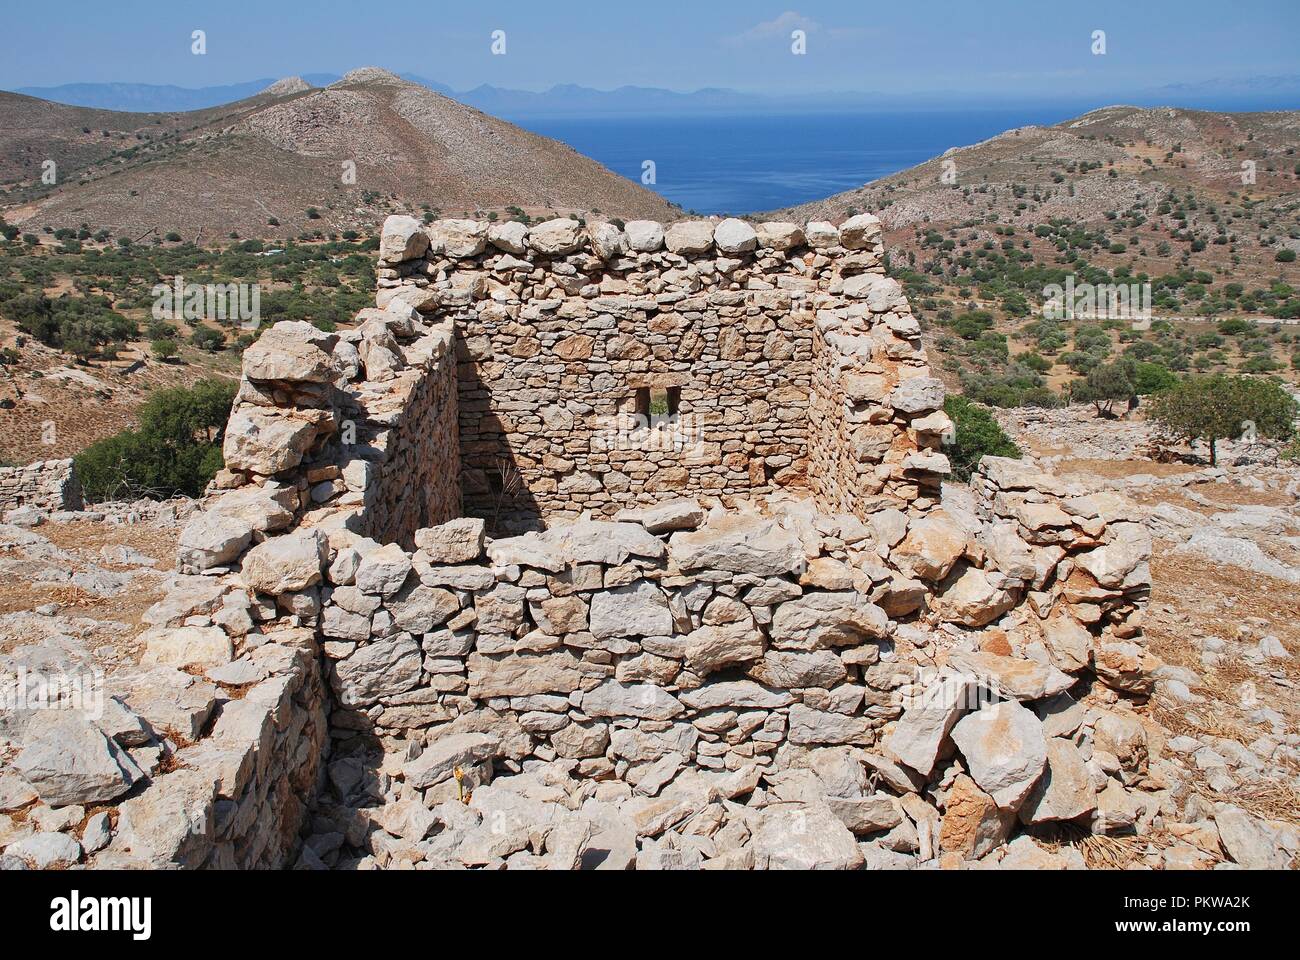 The ruins of the abandoned village of Mikro Chorio on the Greek island of Tilos. Stock Photo